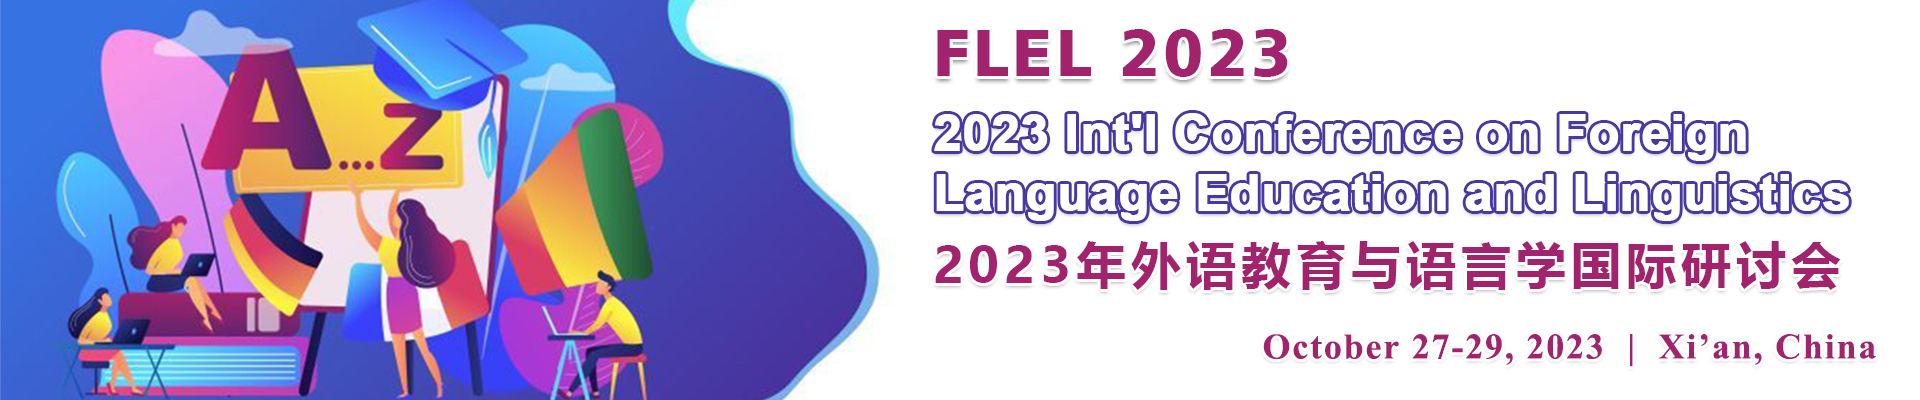 2023 Int'l Conference on Foreign Language Education and Linguistics (FLEL 2023)